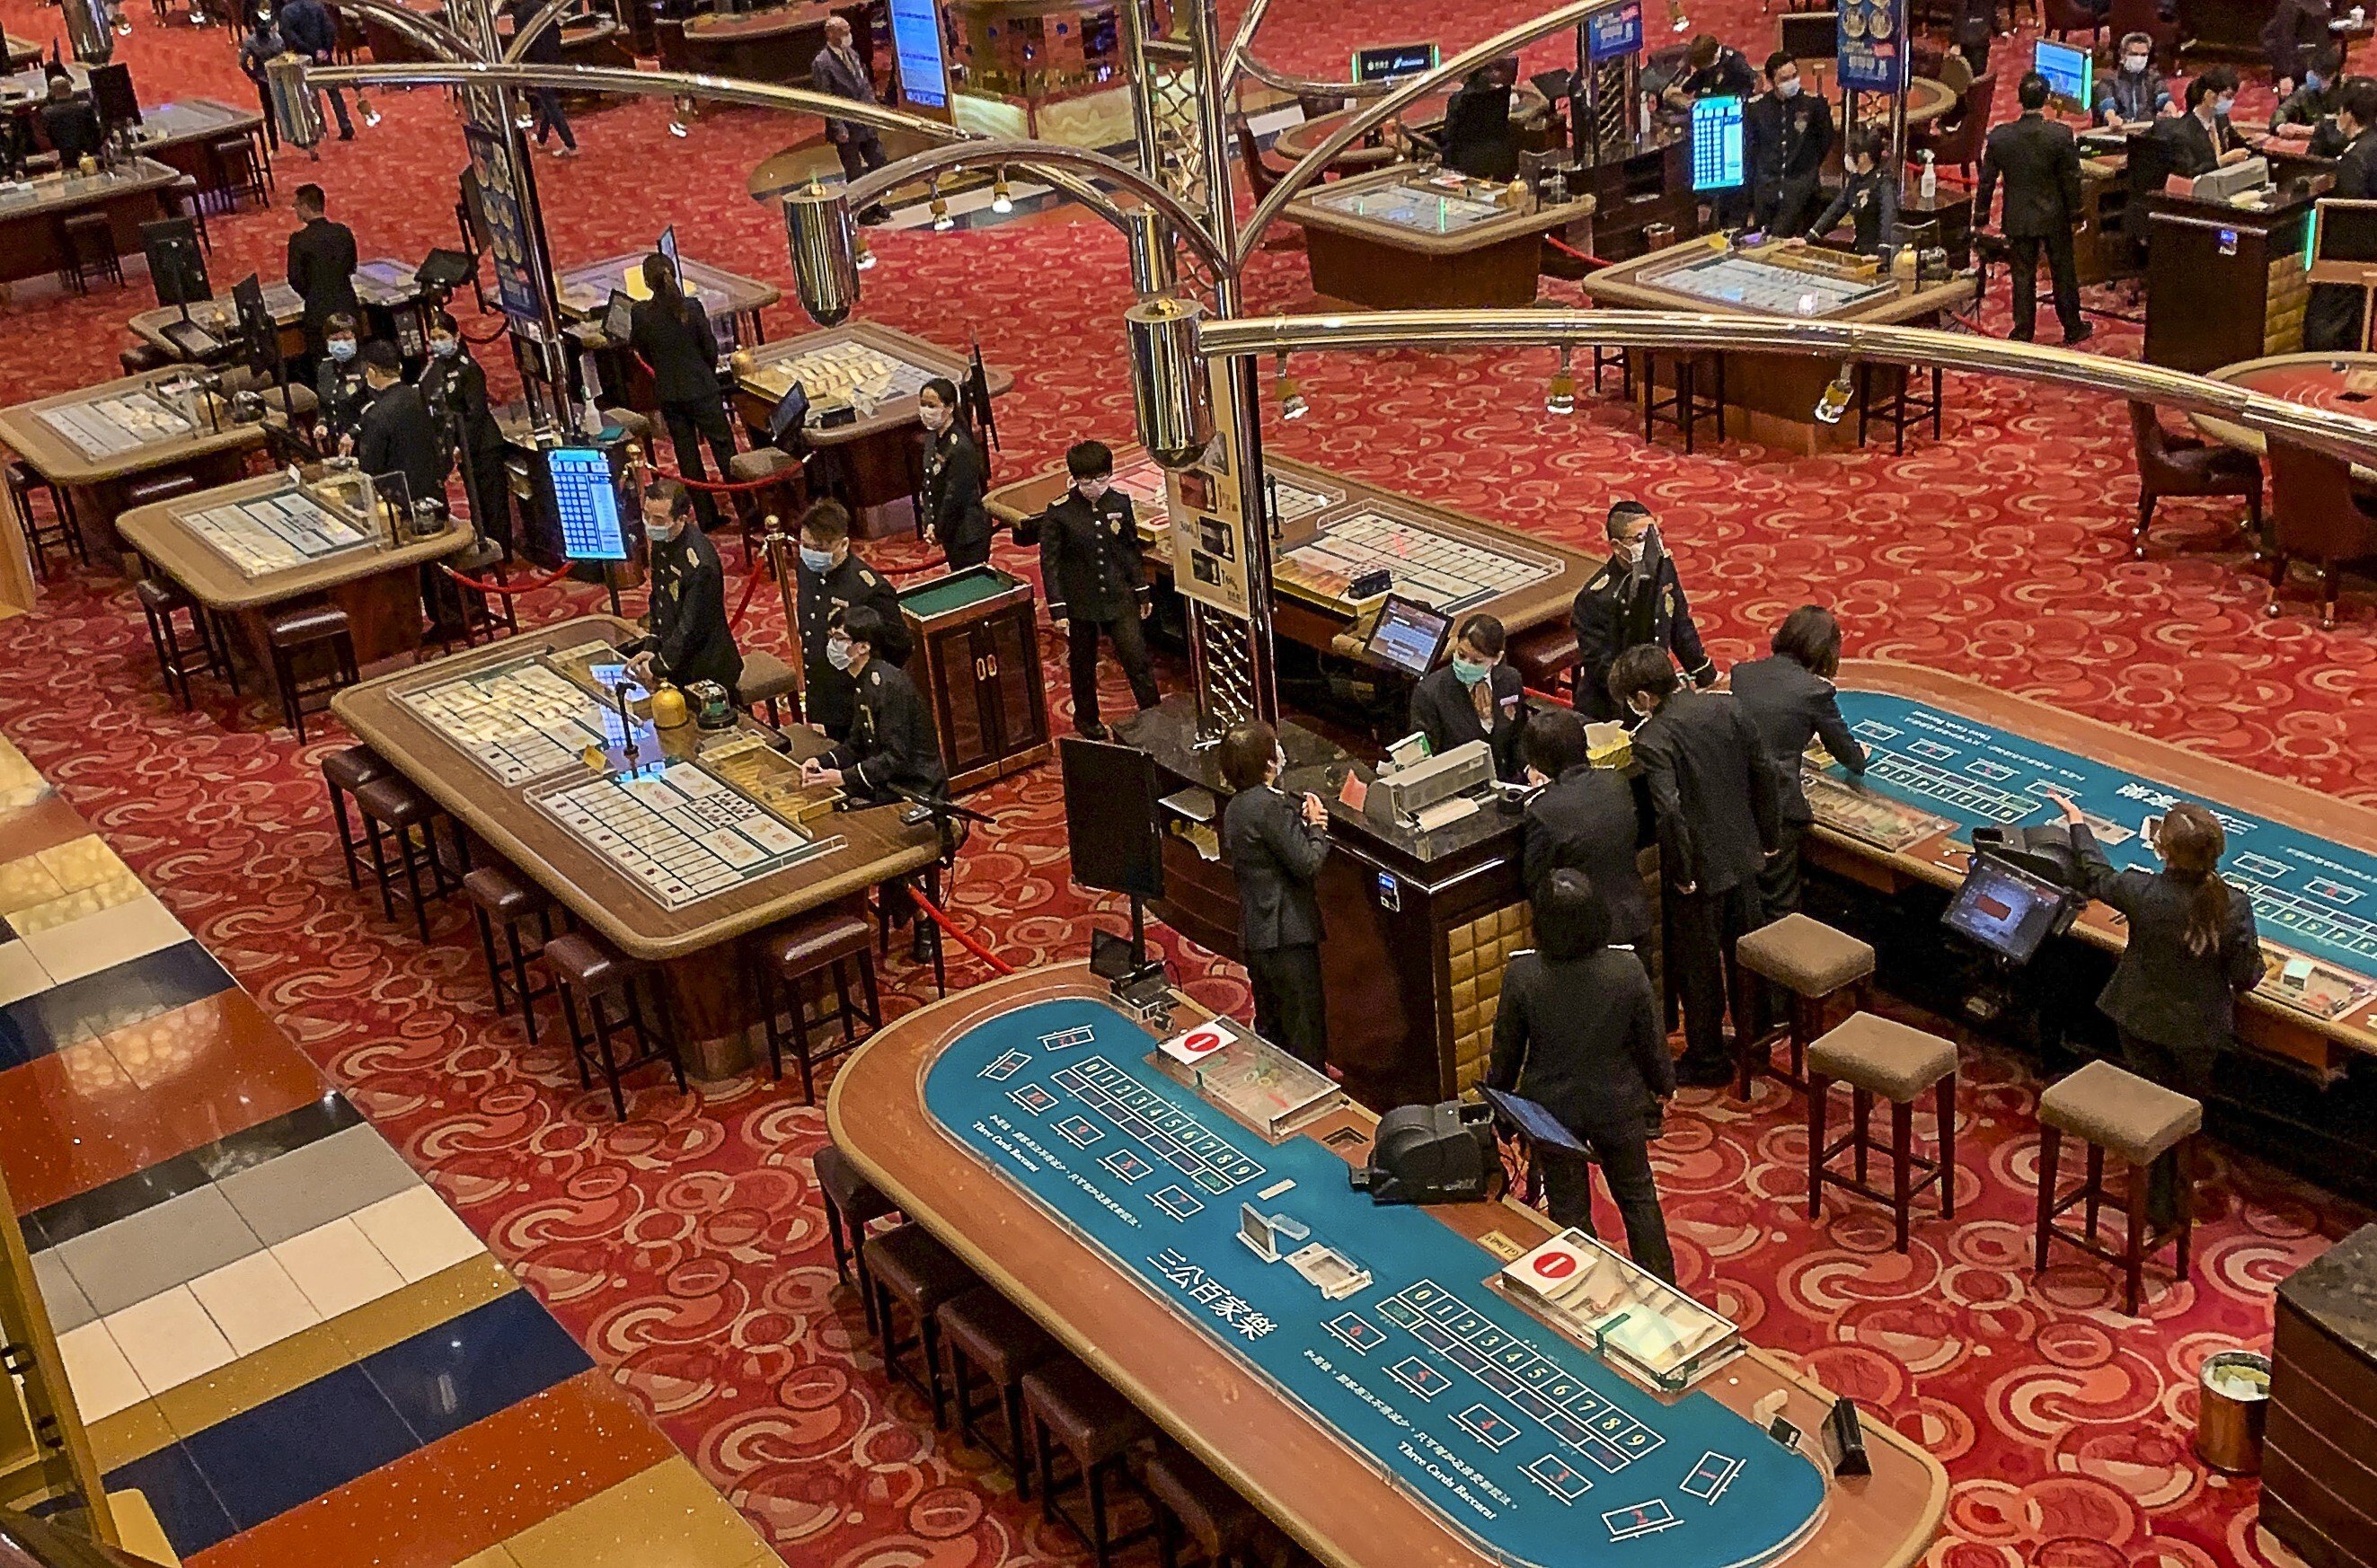 A near-empty gambling hall at the casino of the Grand Lisboa in Macau on 20 February 2020. Photo: SCMP/Handout